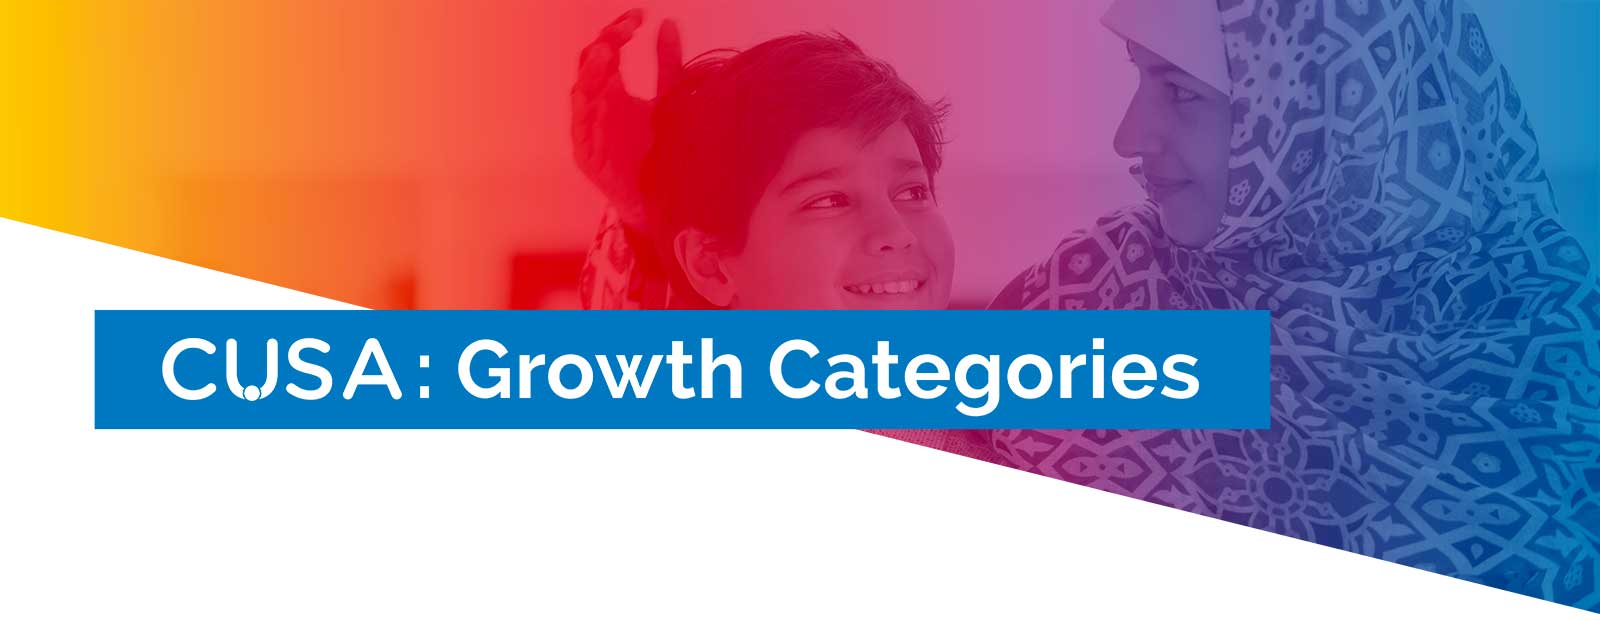 cusa growth categories